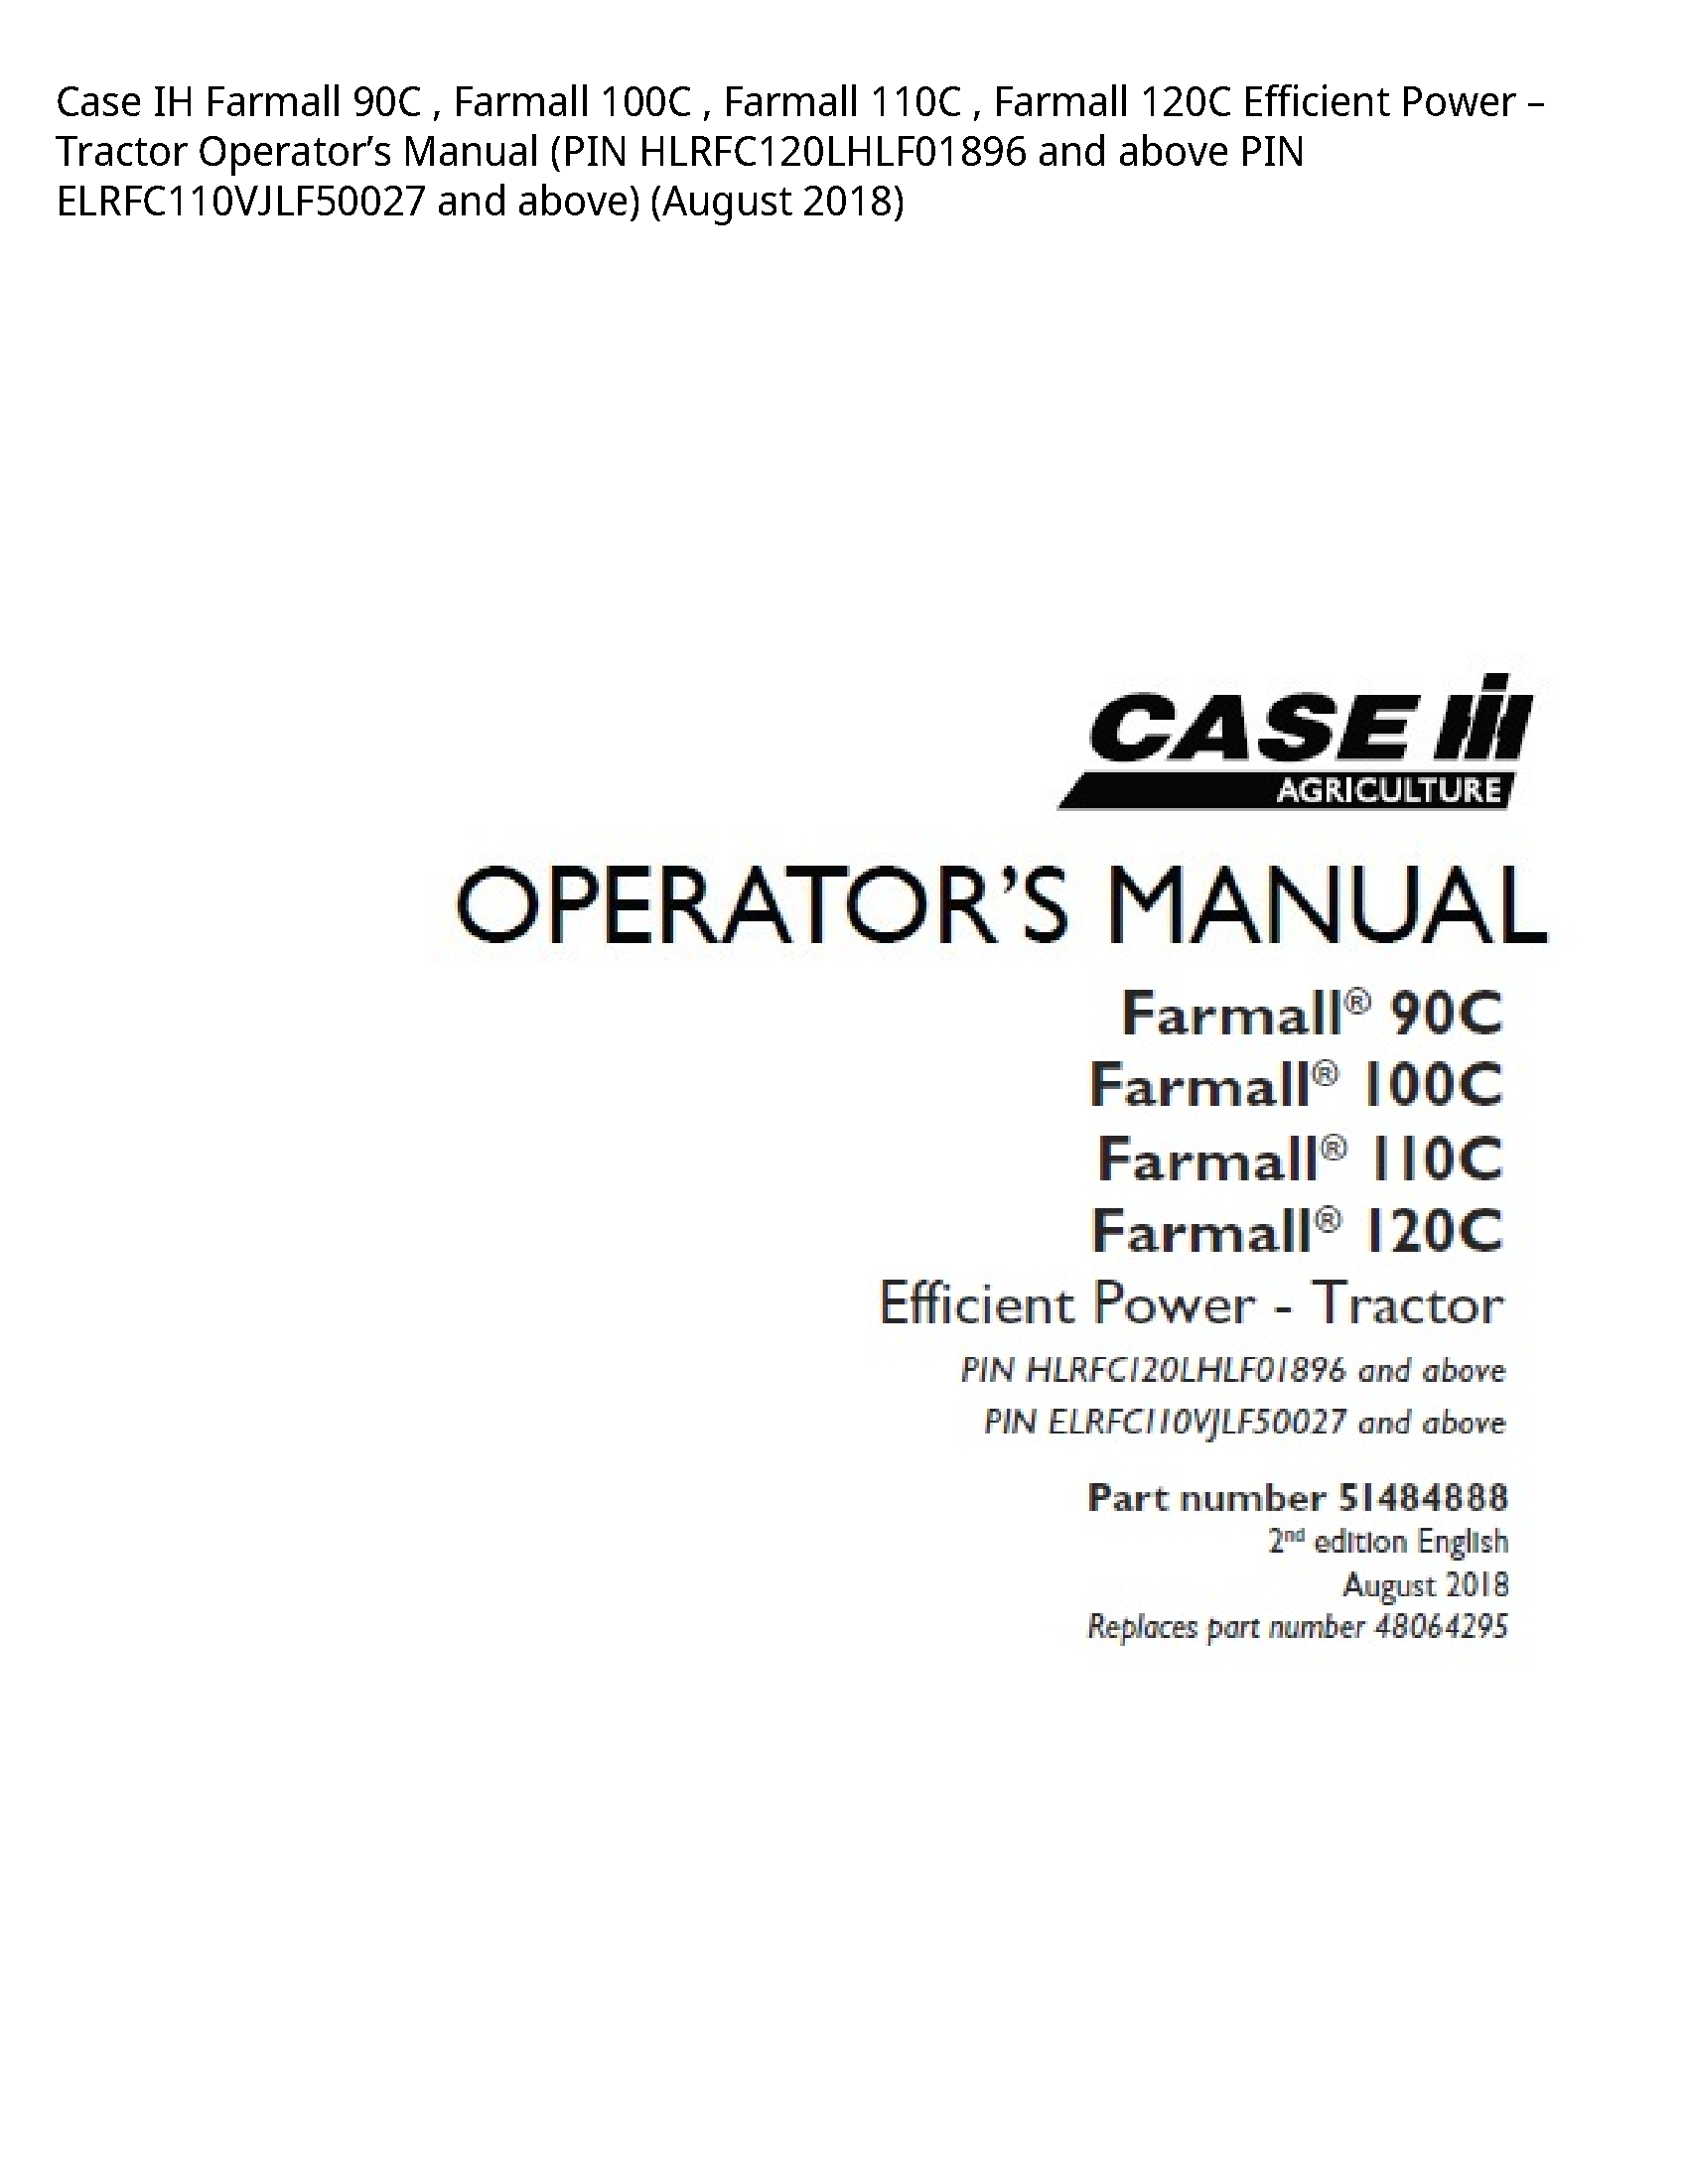 Case/Case IH 90C IH Farmall Farmall Farmall Farmall Efficient Power Tractor Operator’s manual